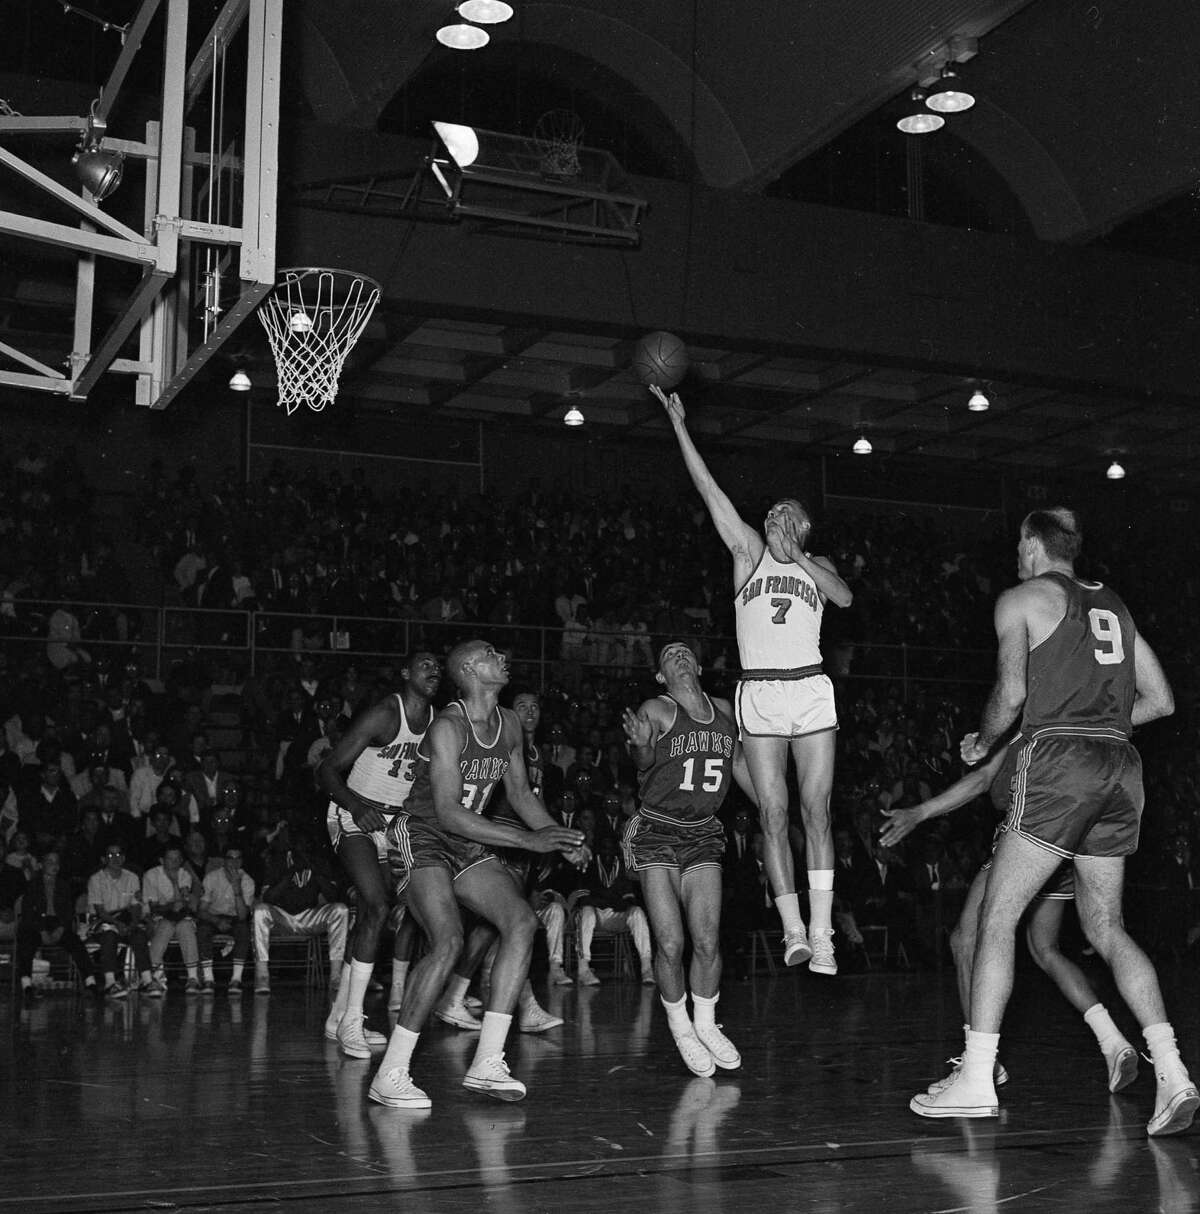 San Francisco Warriors playoff game vs the St. Louis Hawks 4/1/1964 Gary Phillips drives to the basket